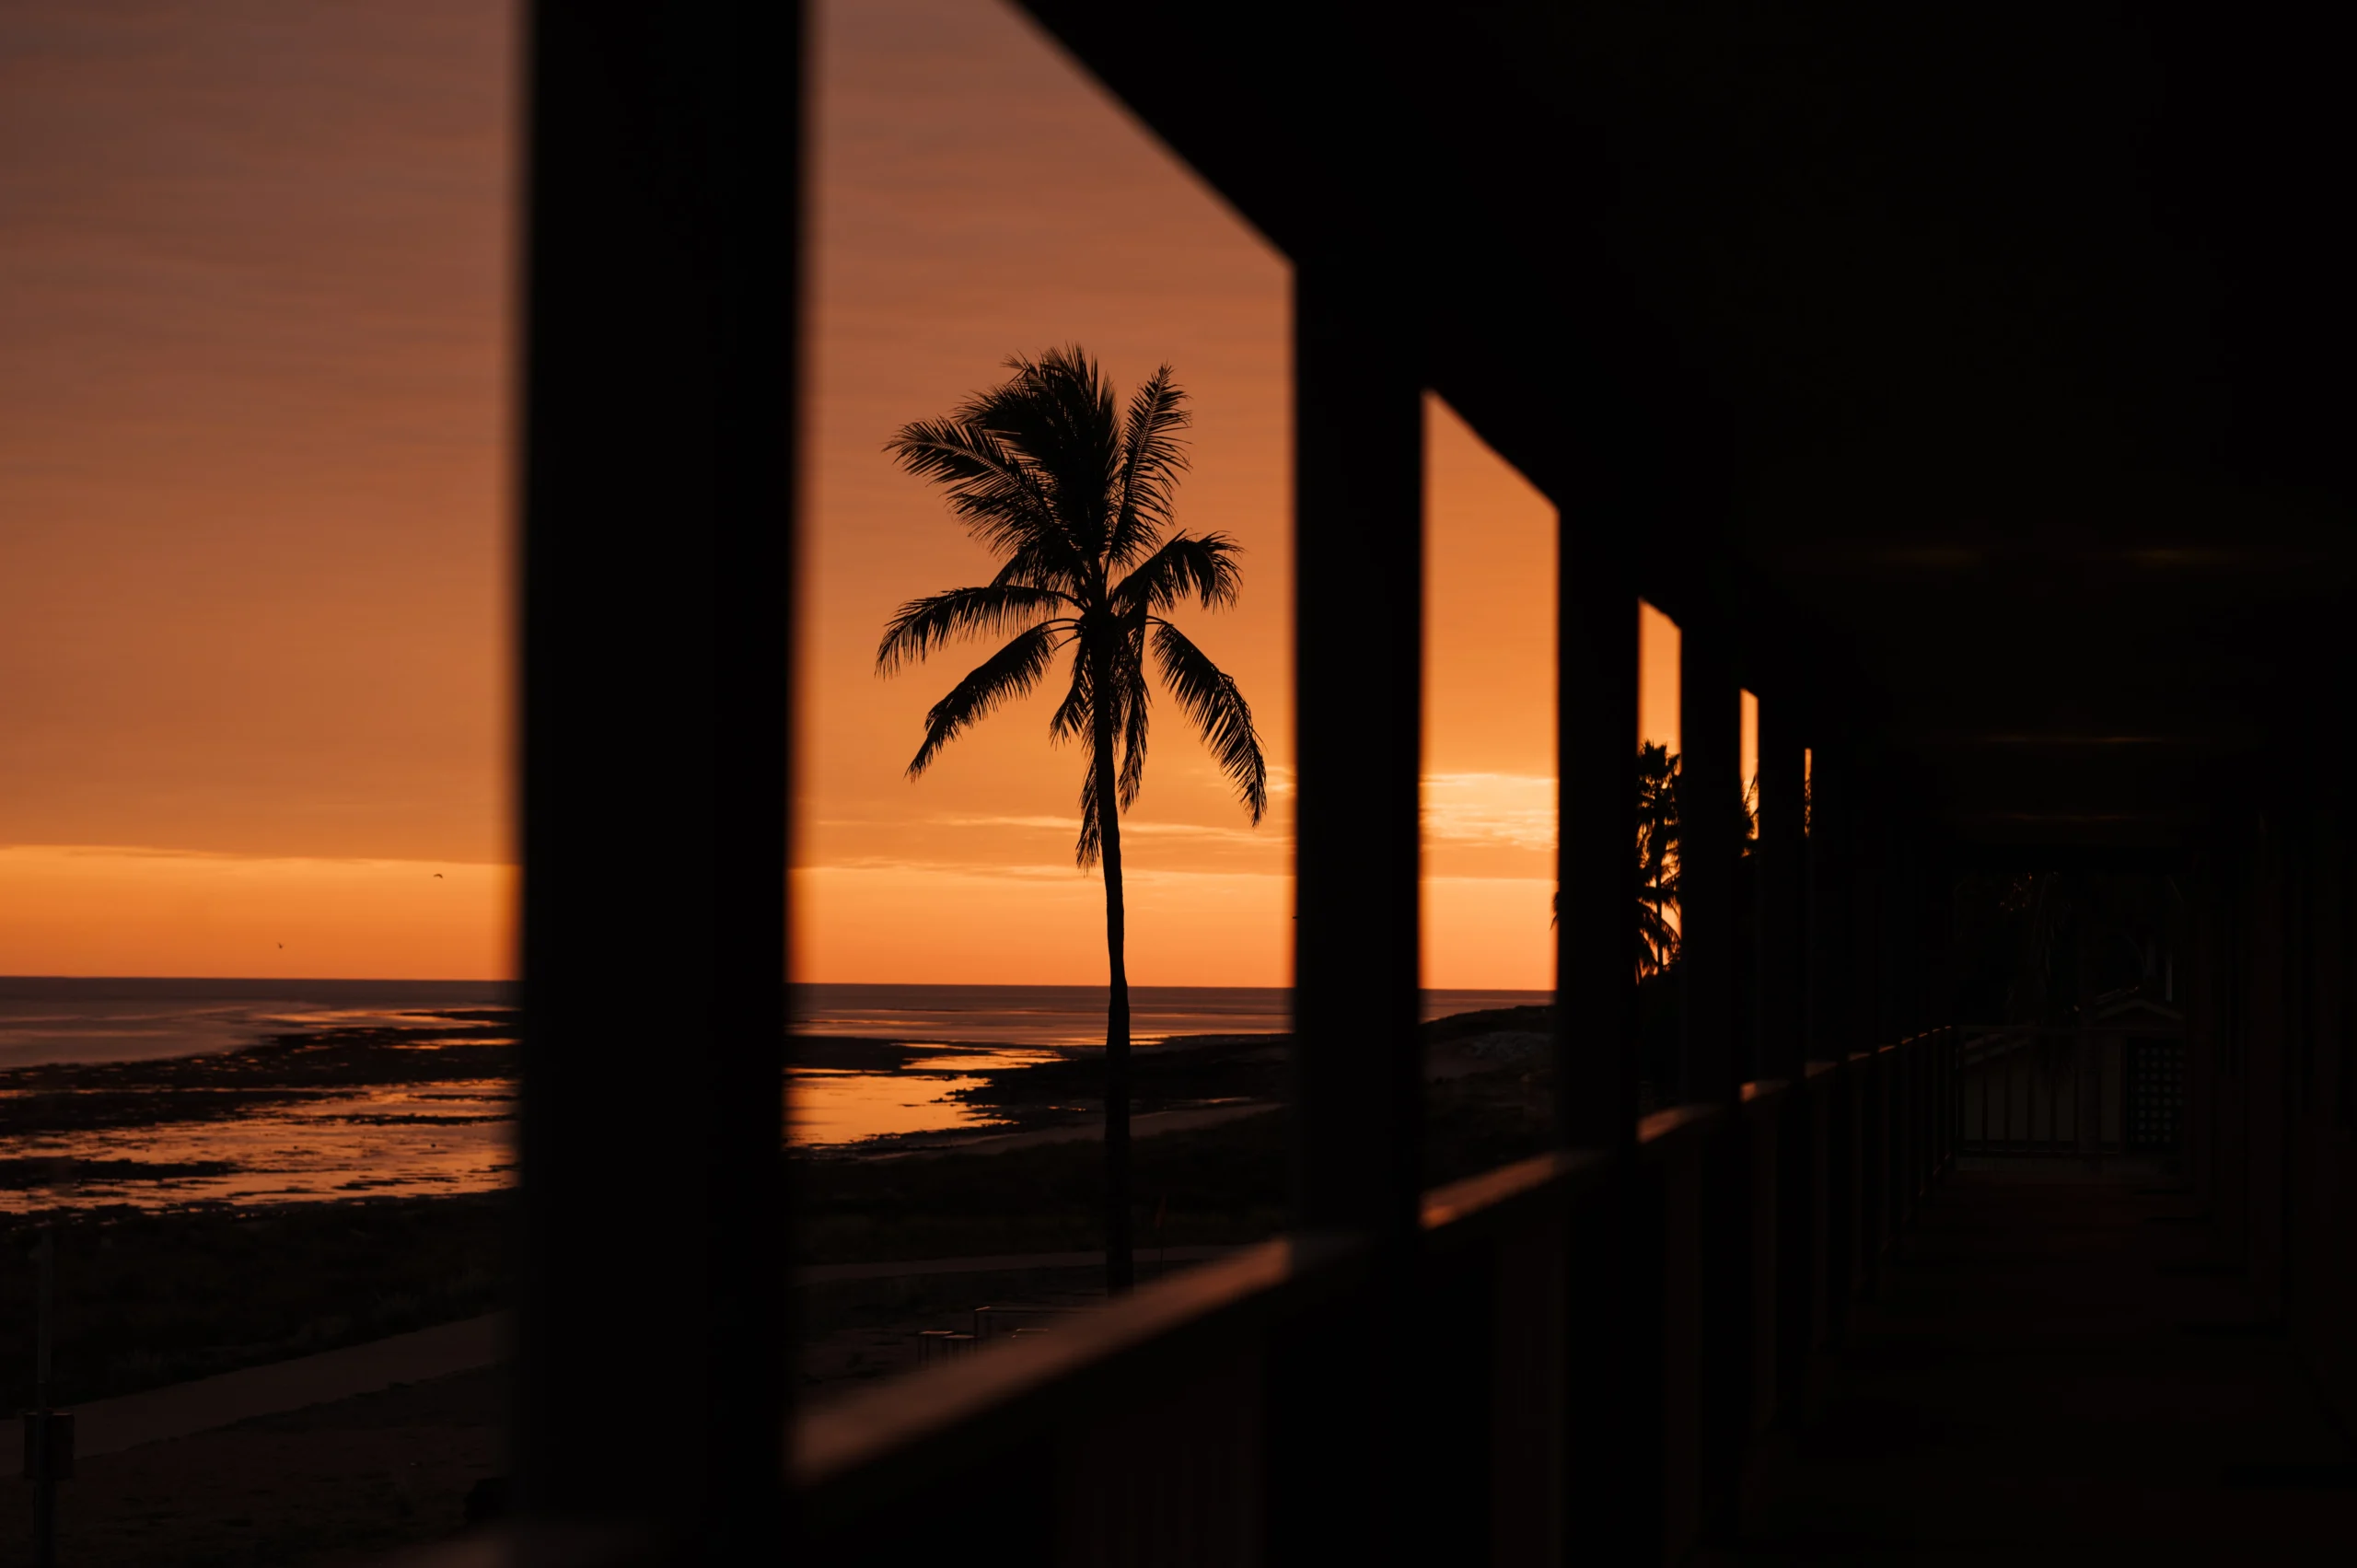 Photo of a view showing the sun setting which is silhouetting a palm tree on the beach